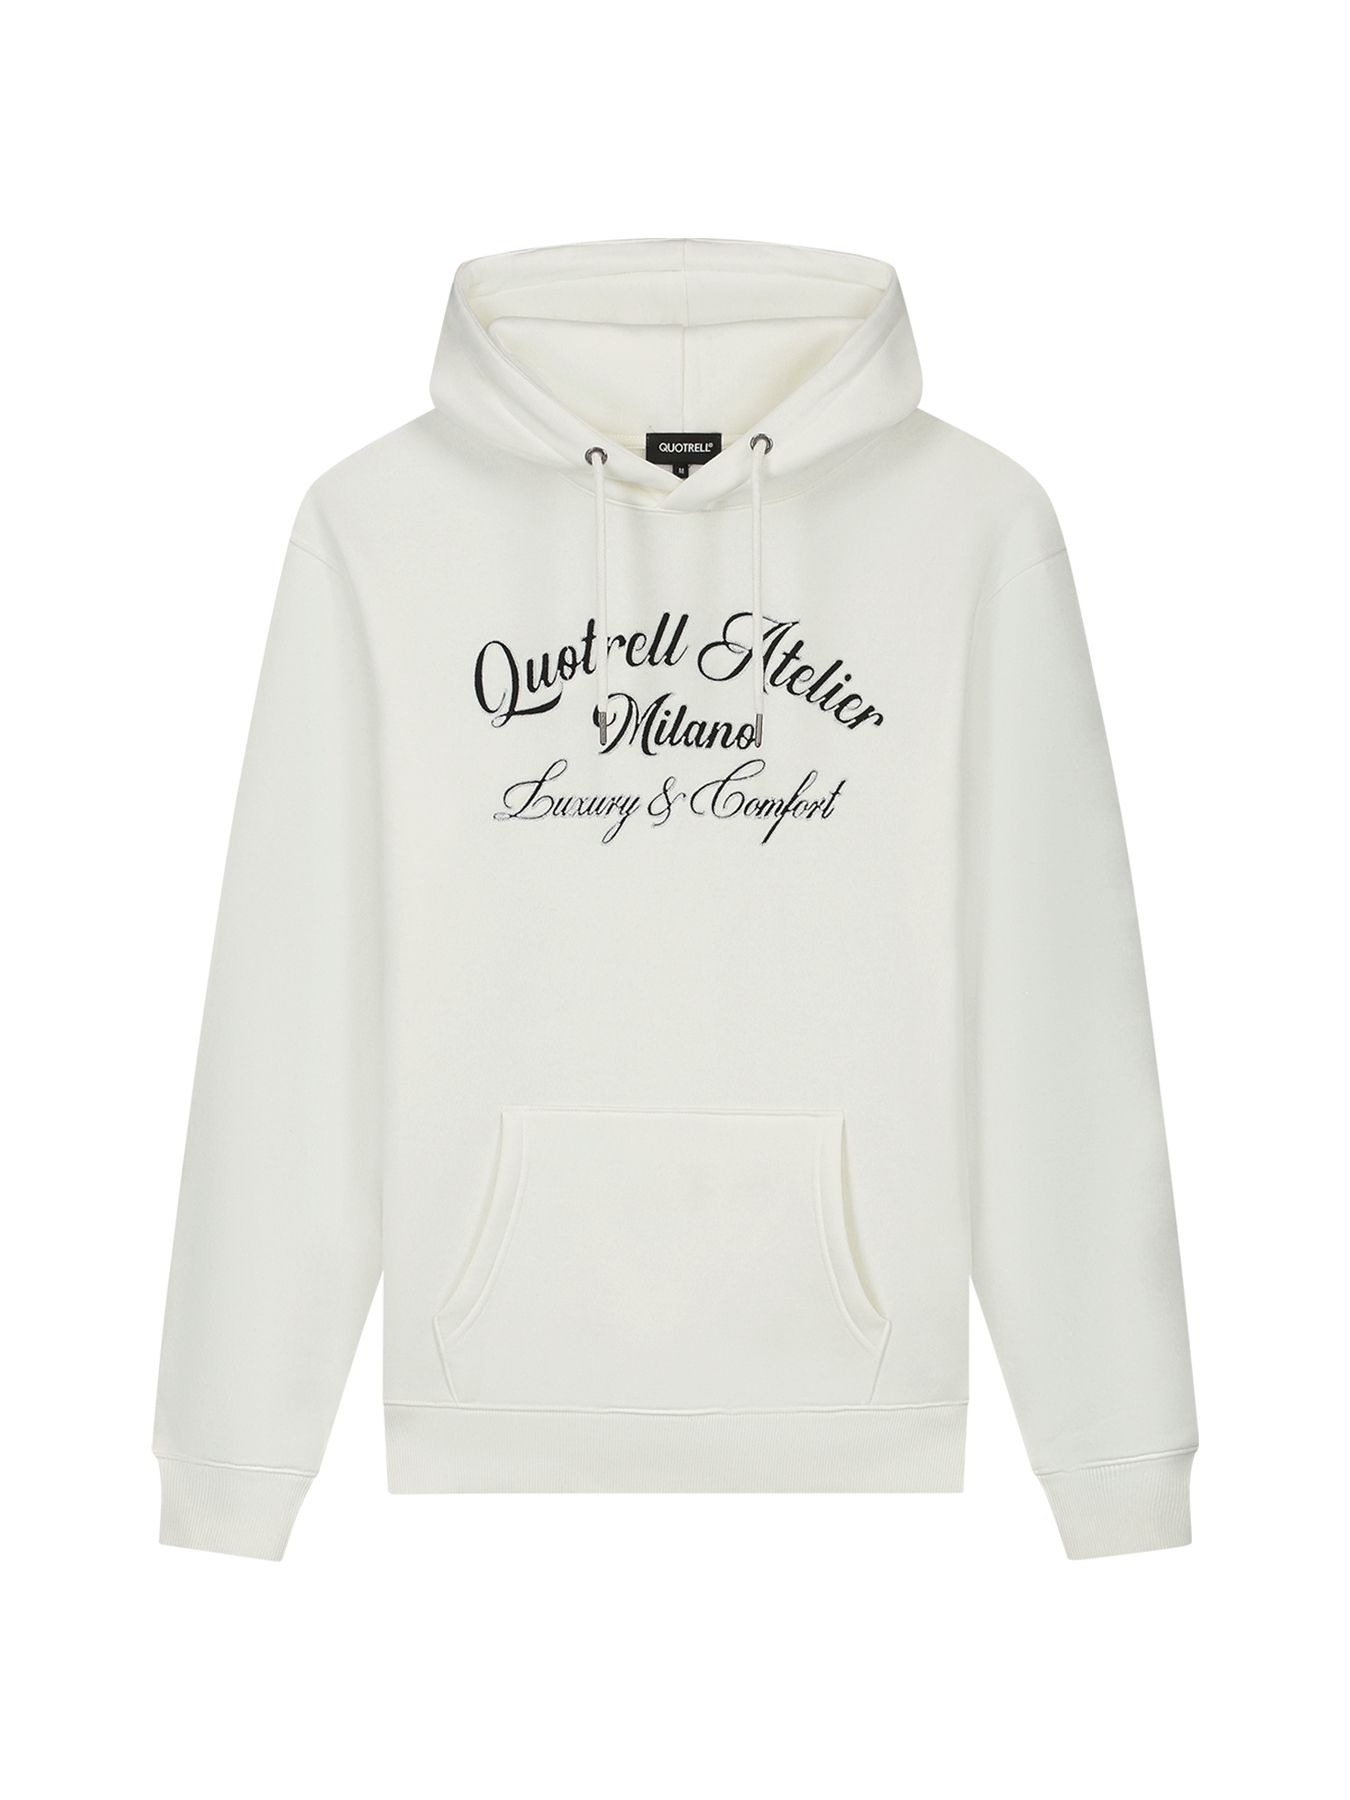 Quotrell Atelier milano chain hoodie Off White/White 00105213-OWW